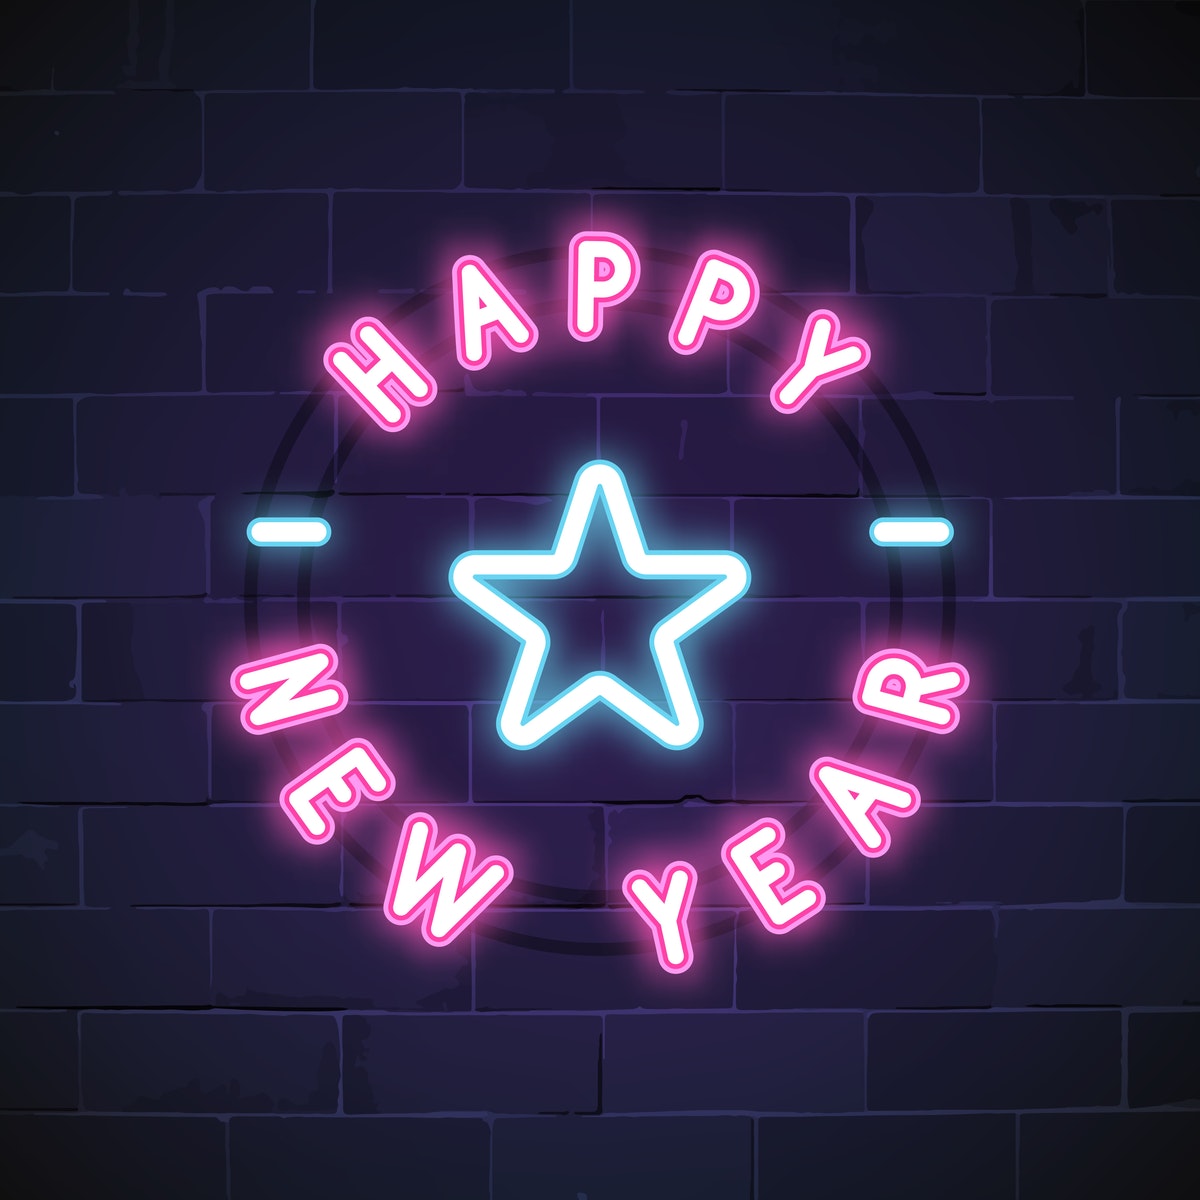 Neon pink and blue lights that say "Happy New Year" with a blue star in the center.